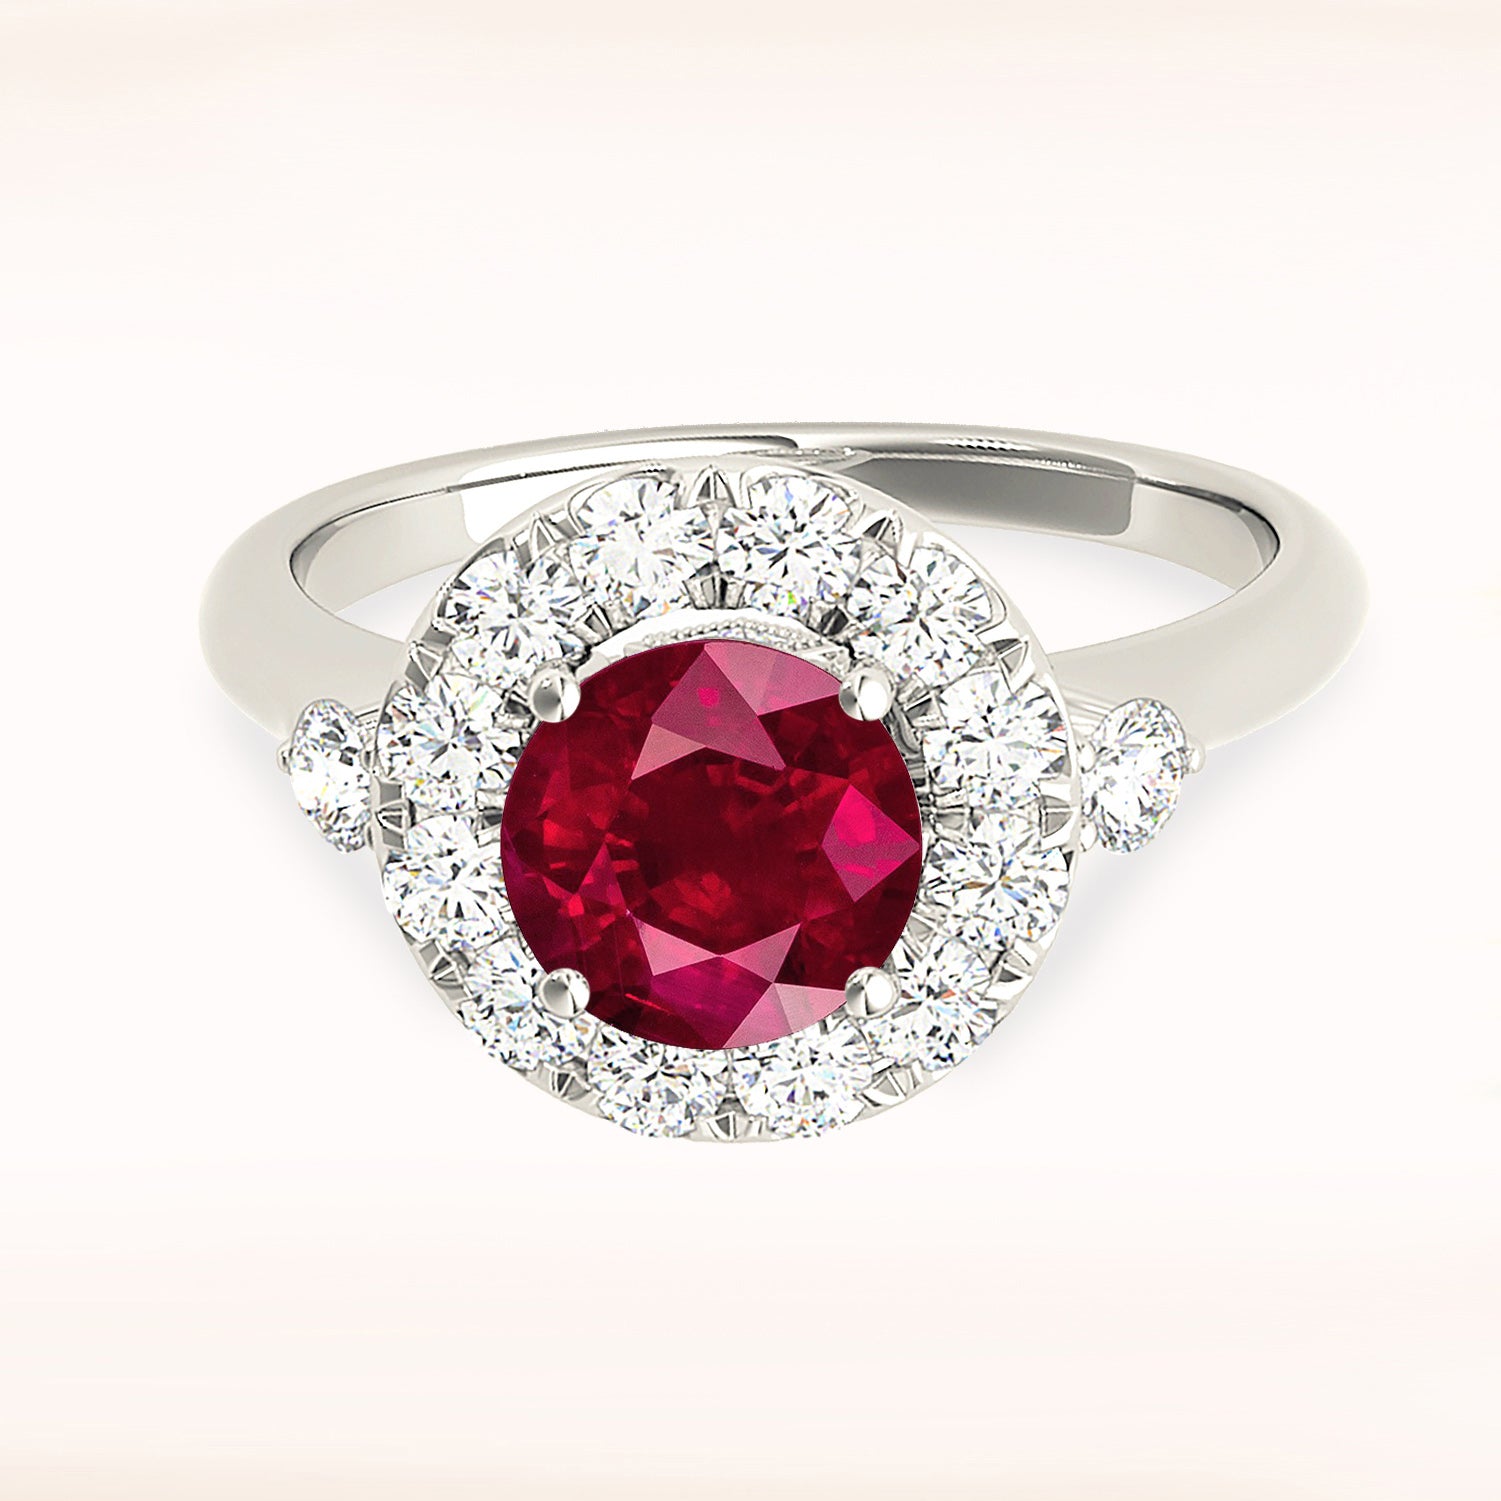 1.35 ct. Genuine Ruby Ring With 0.40 ctw. Diamond Halo And Side Accent Diamonds, Solid Gold band-in 14K/18K White, Yellow, Rose Gold and Platinum - Christmas Jewelry Gift -VIRABYANI